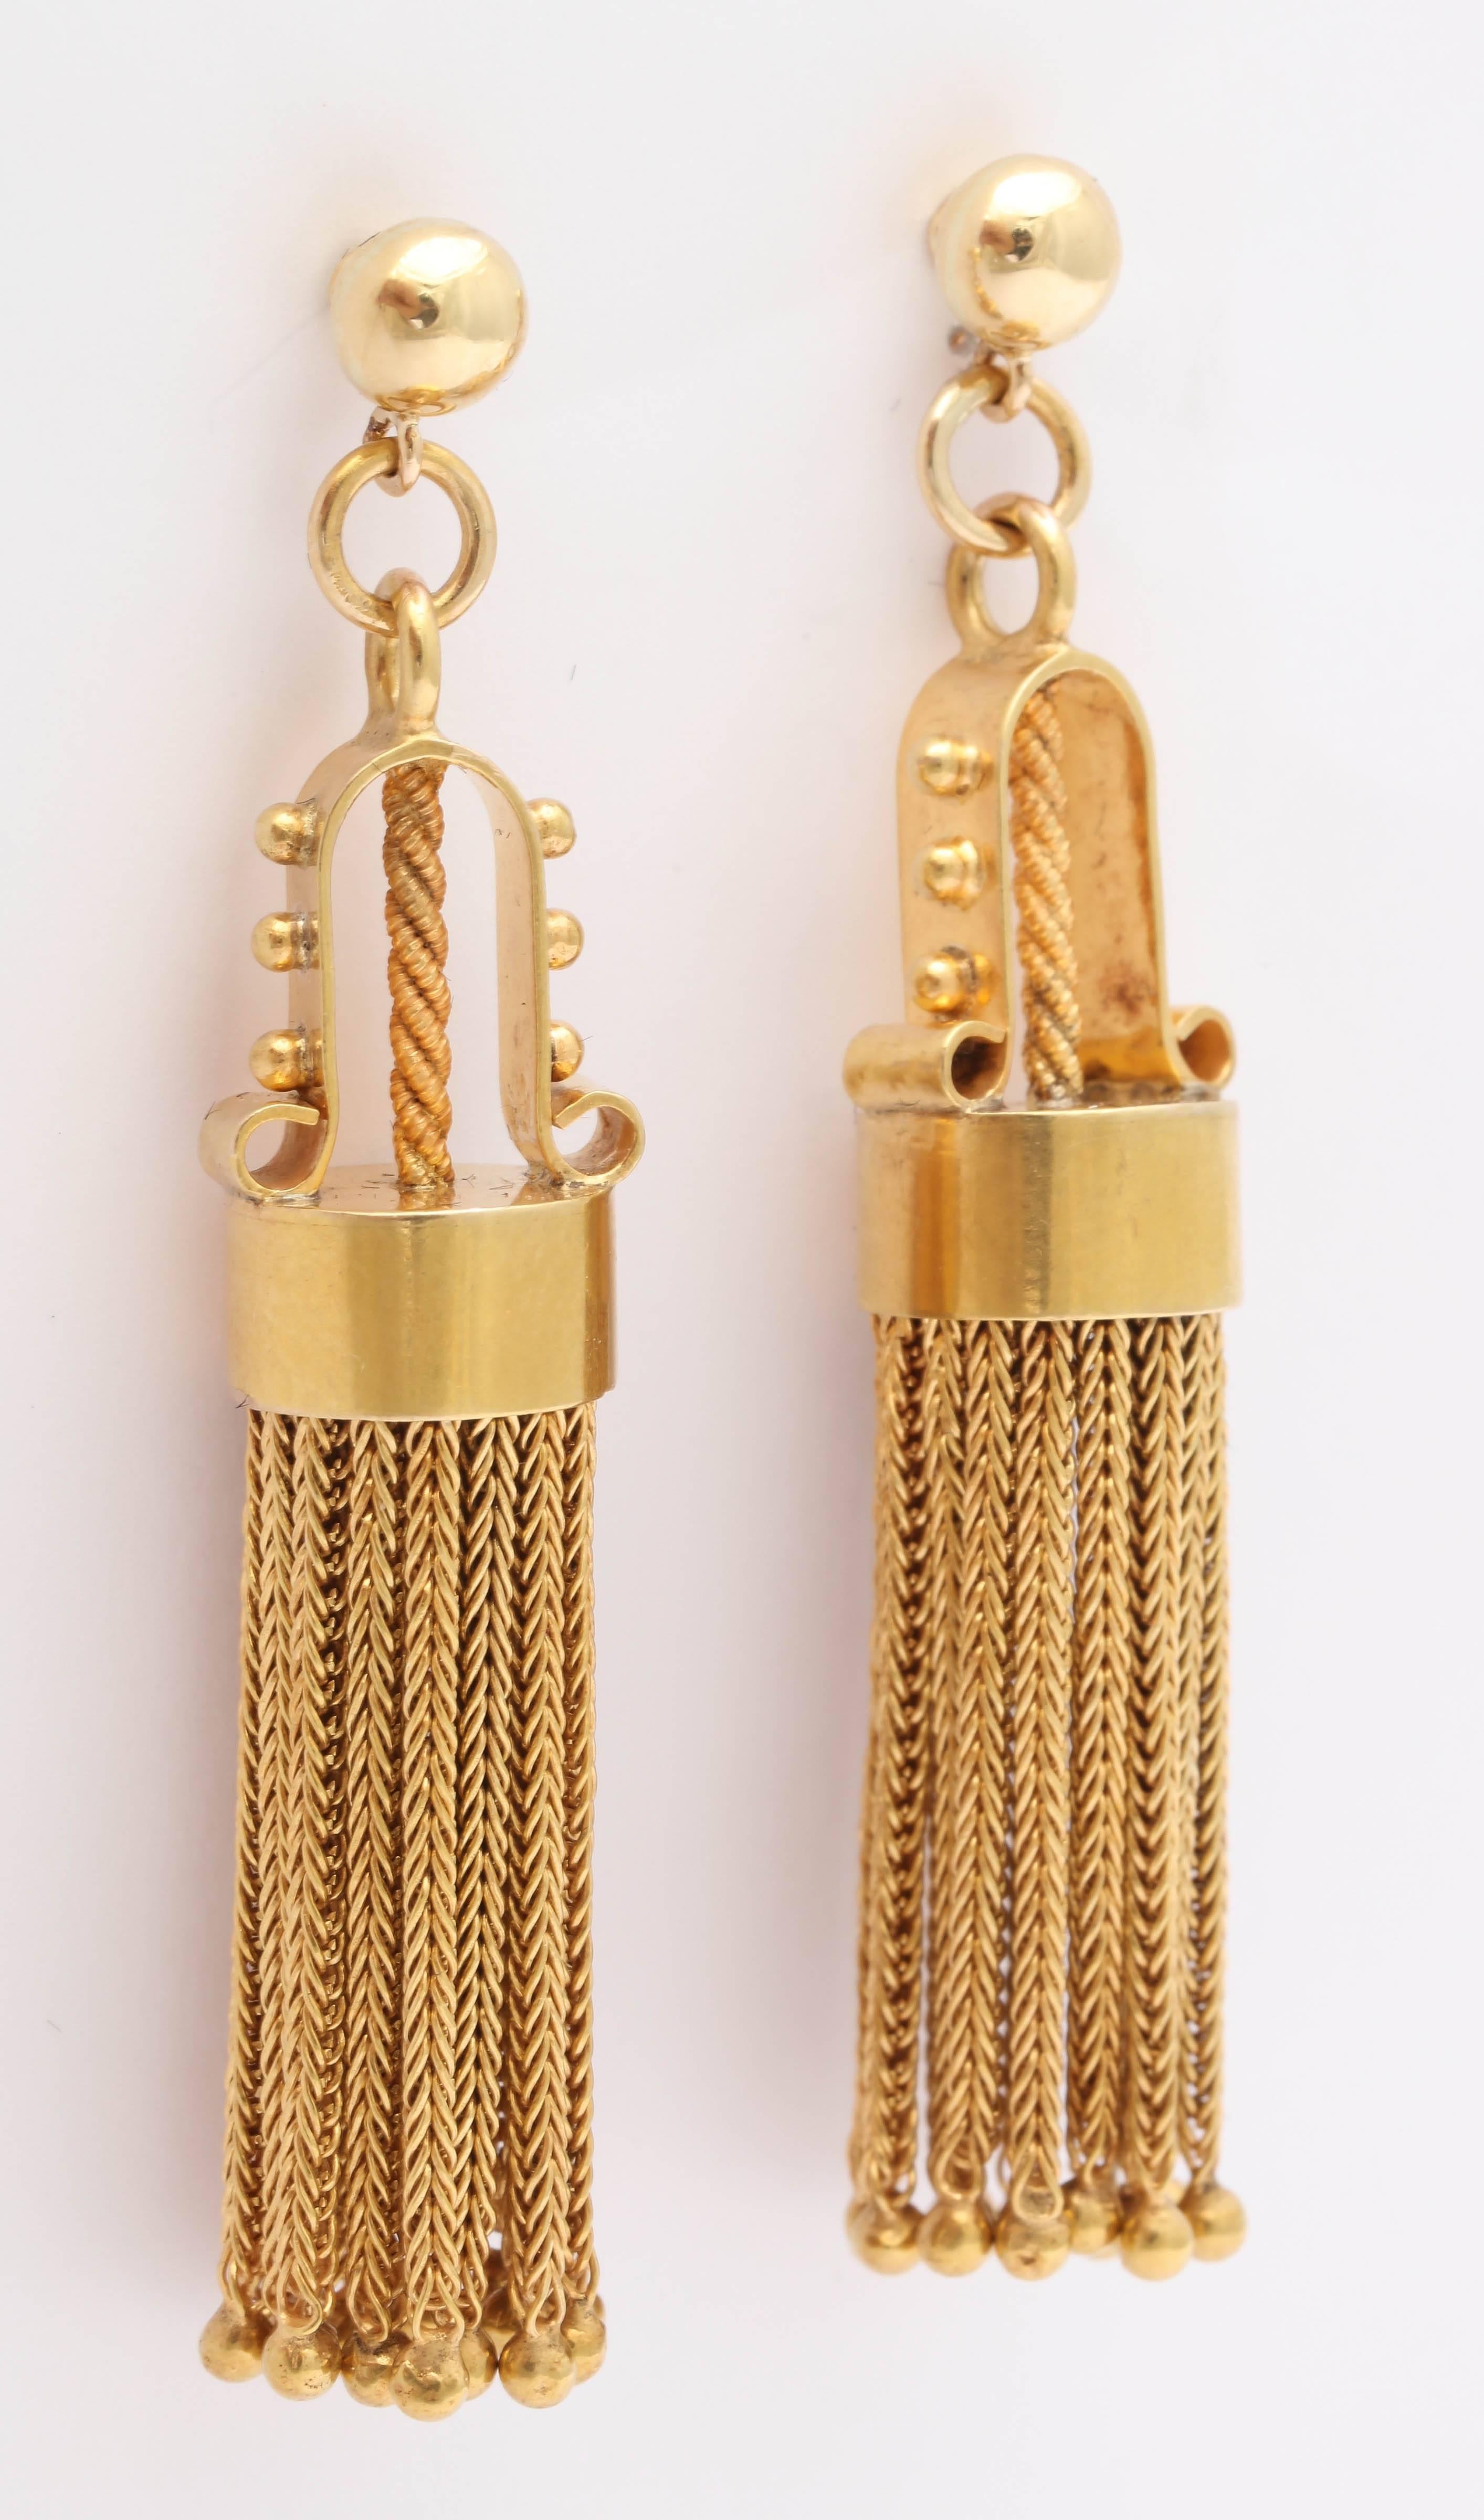 14kt Yellow Gold Pierced Earrings - highly stylized and unlike any that you have ever seen.  Circa 1950 but look1850.  Antique looking yet very modern and updated.
Tassels terminate with a gold ball bead attached to a foxtail chain. Are presently